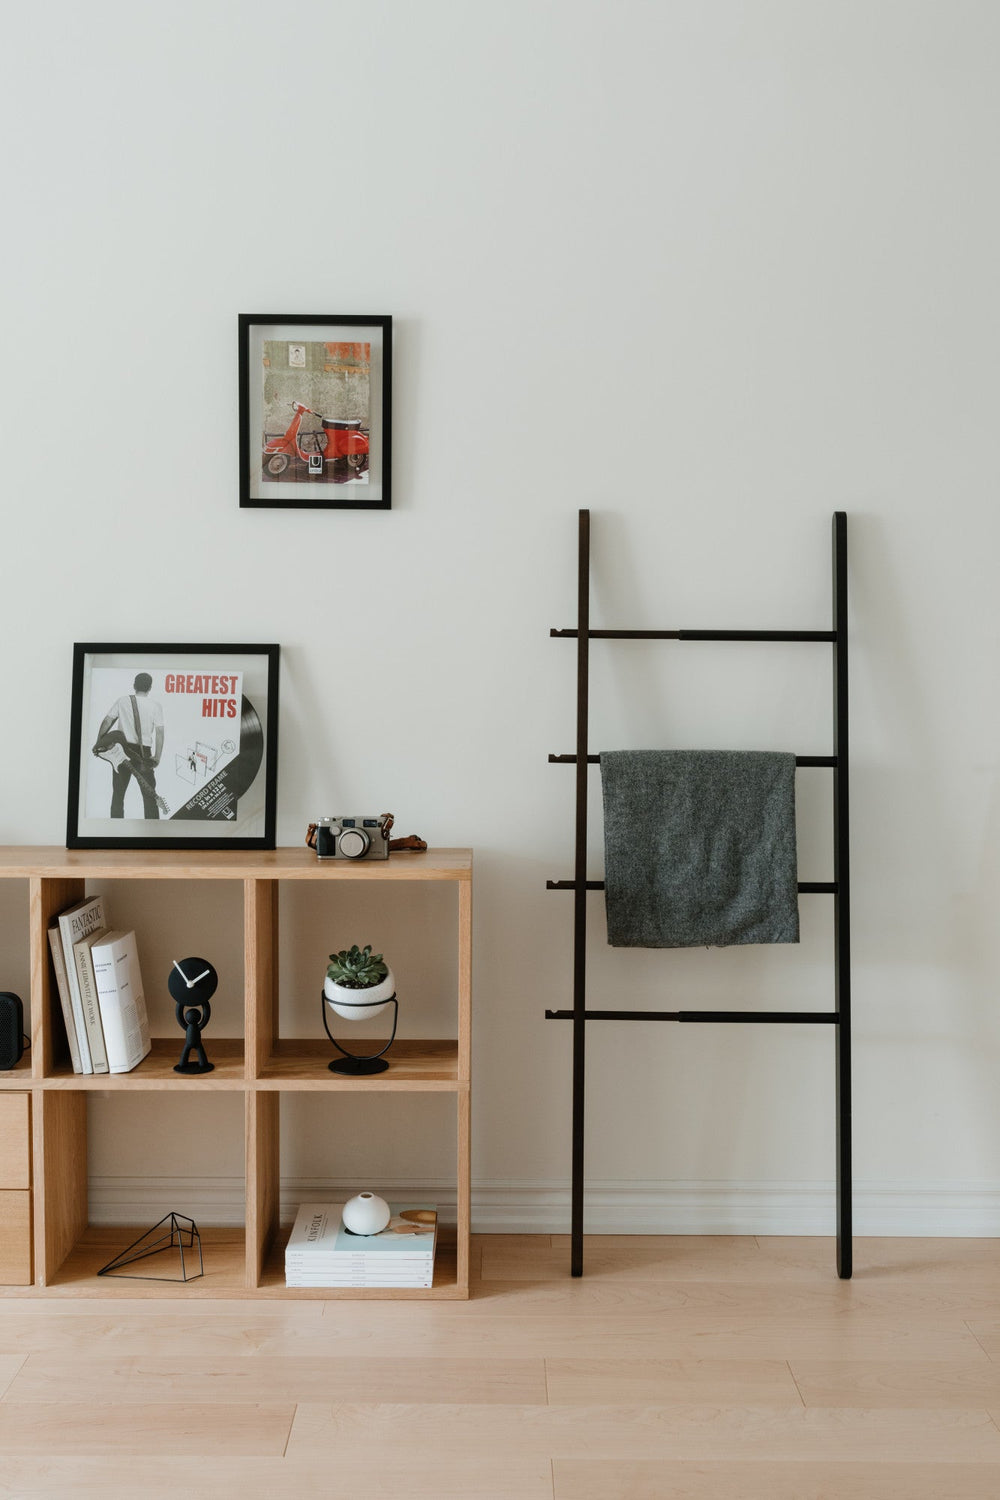 Wall Frames | color: Black | size: 11x14"""" (28x35 cm) | Hover